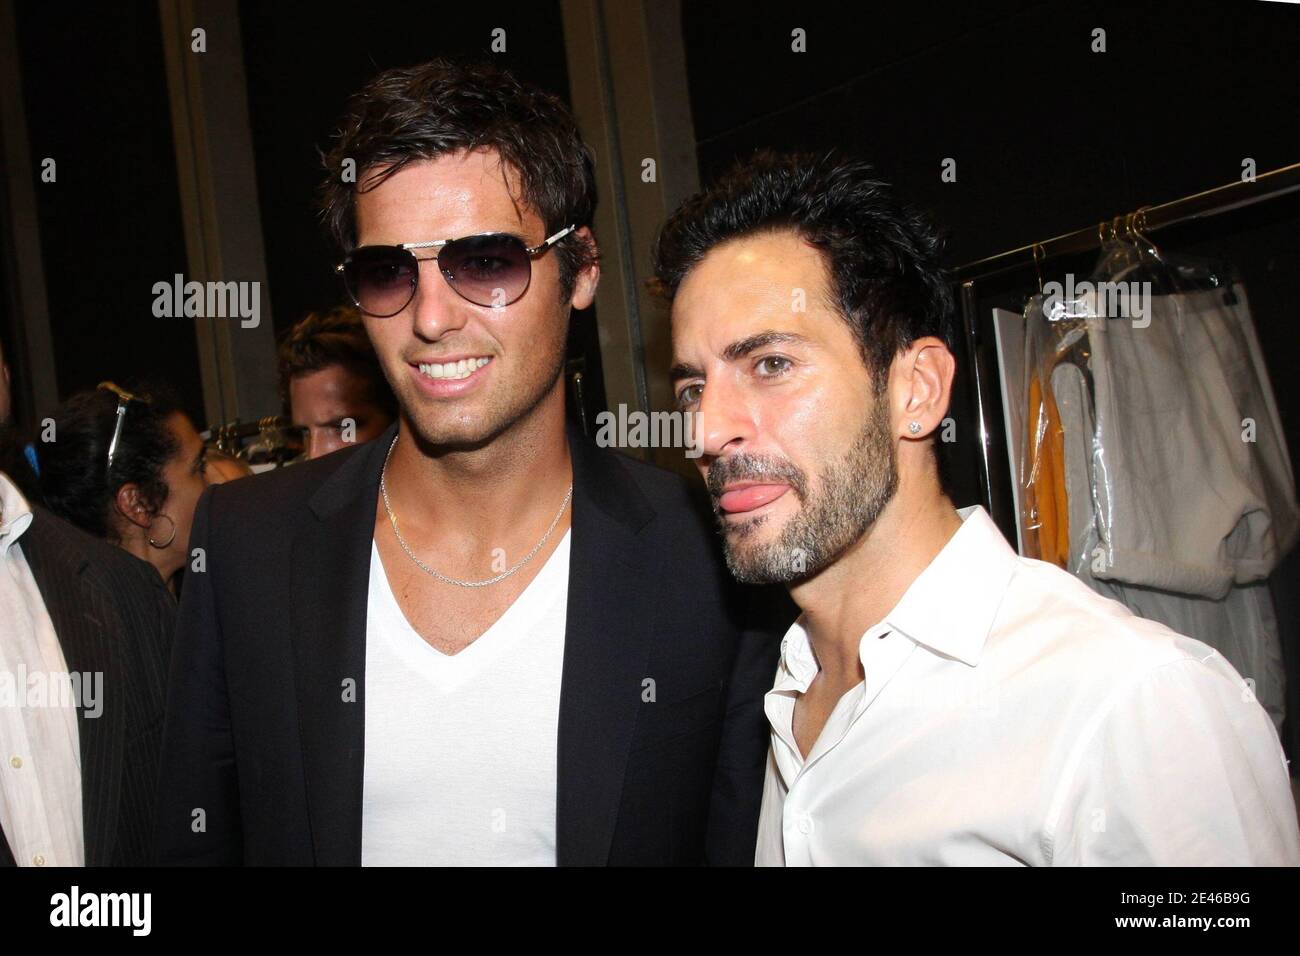 Bordeaux's soccer player Yoann Gourcuff with a friend during Louis